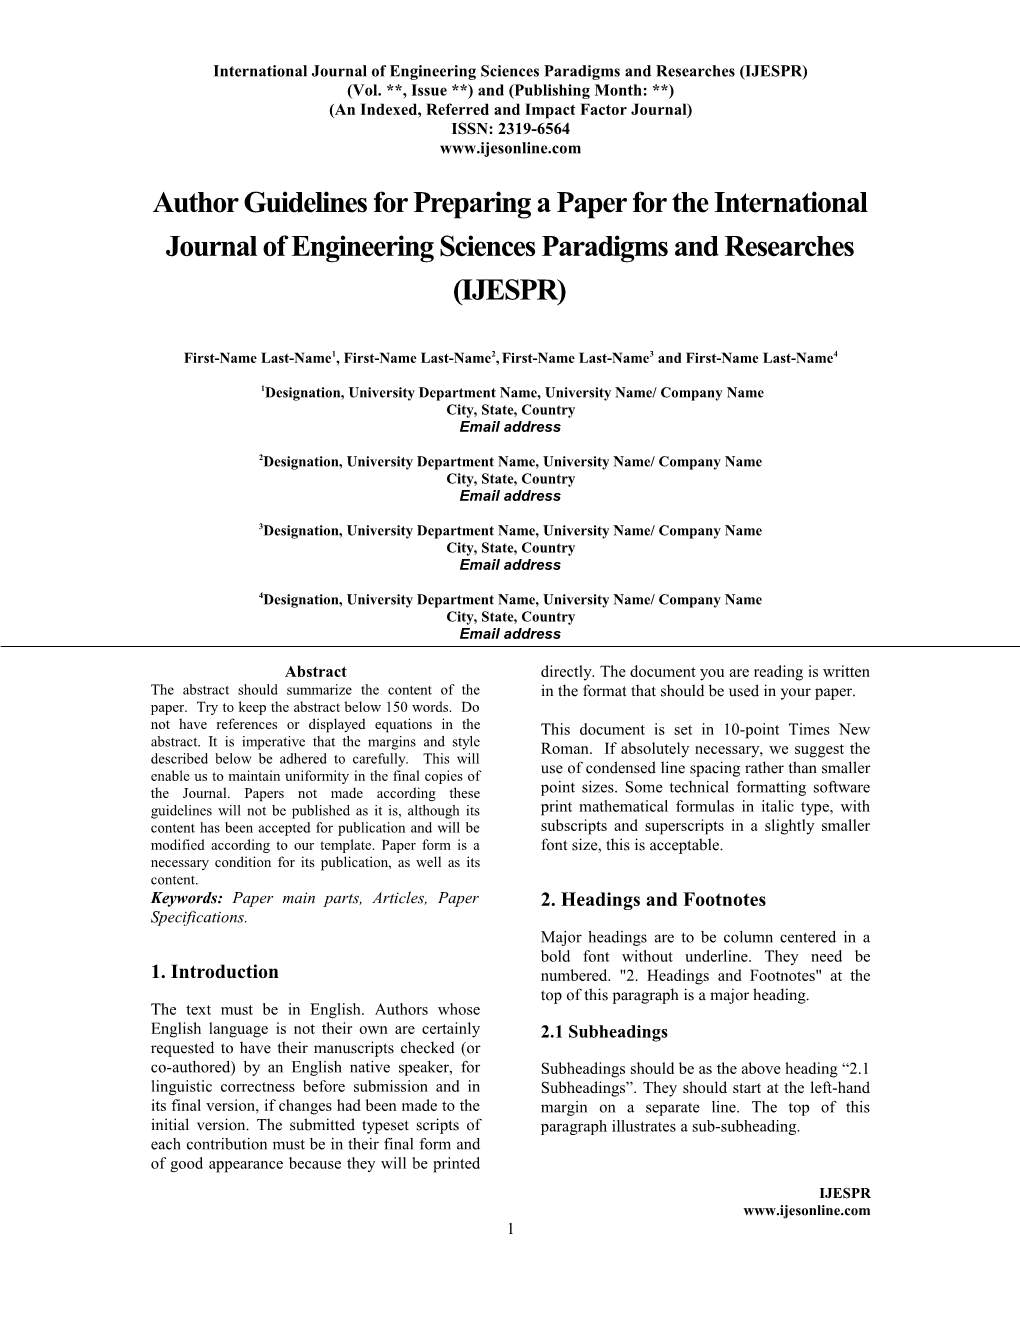 Author Guidelines for Preparing a Paper for the International Journal of Computer Science